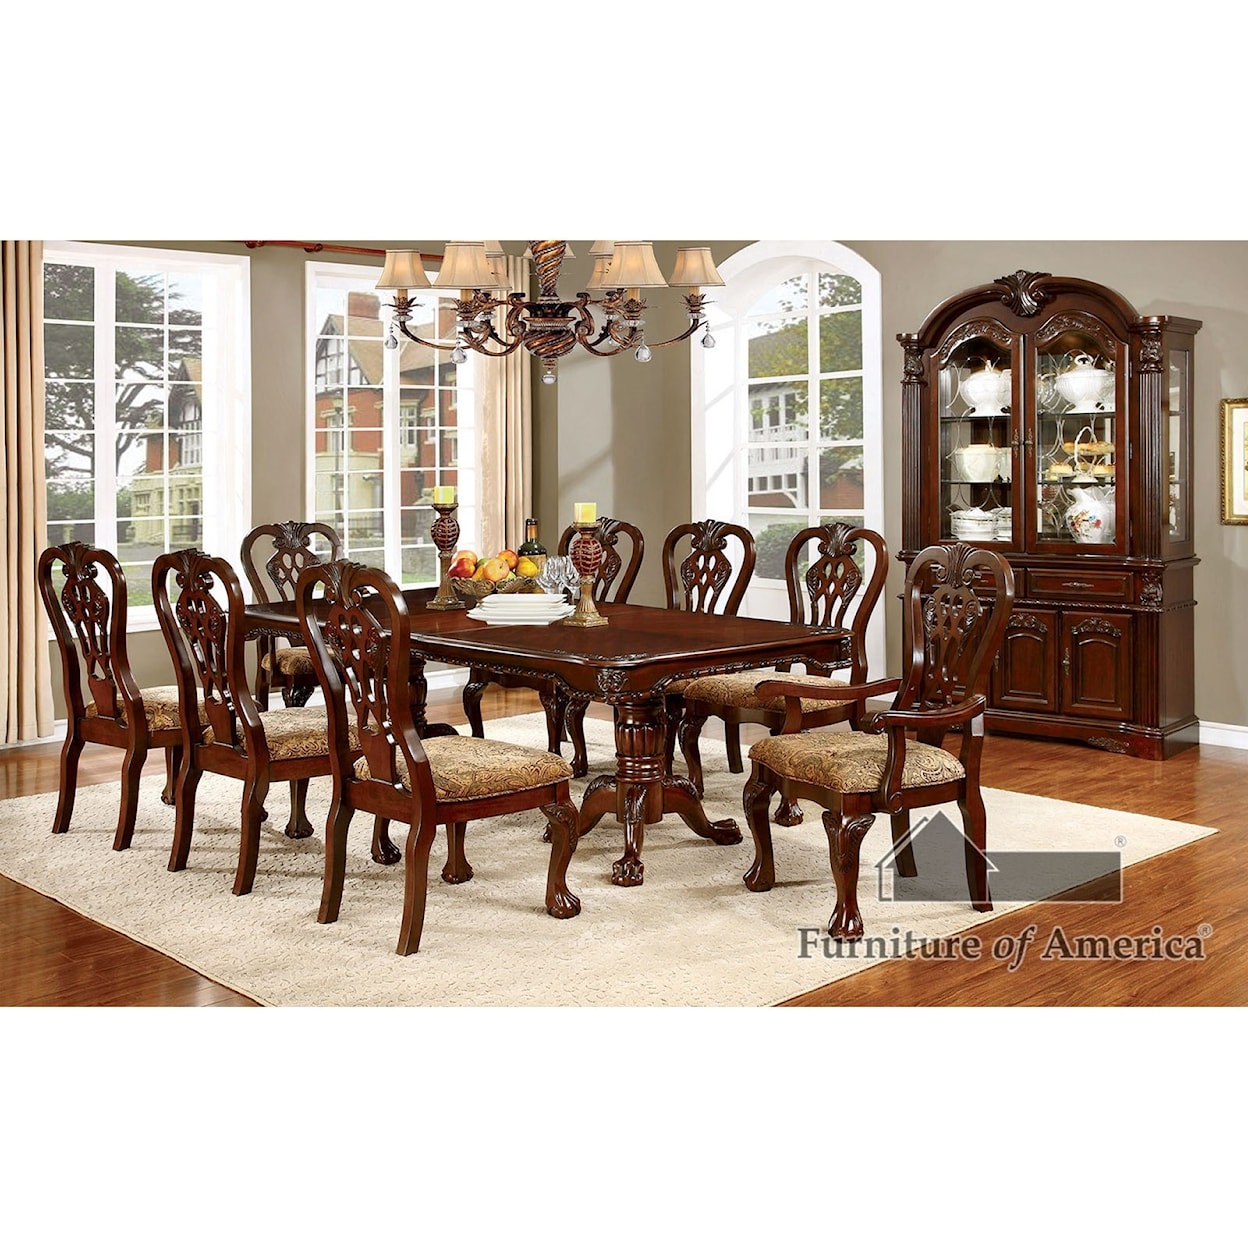 Furniture of America Elana Table + 2 Arm Chairs + 4 Side Chairs